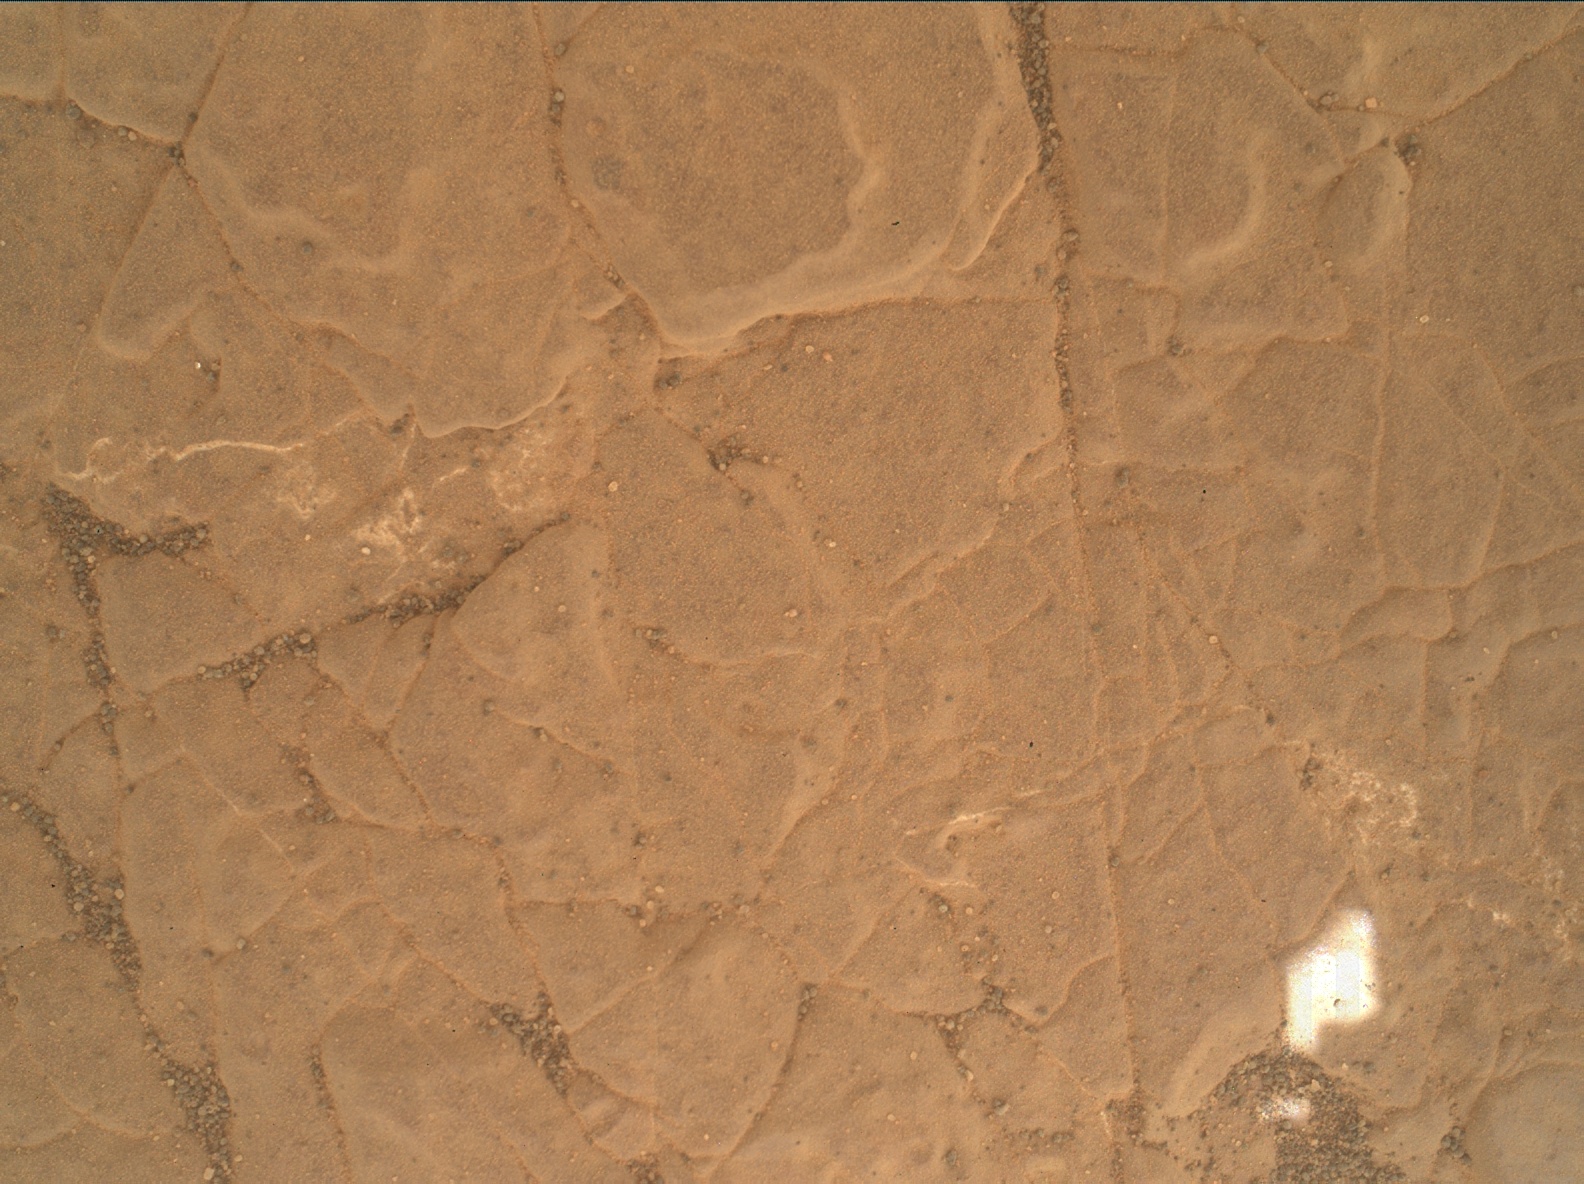 Nasa's Mars rover Curiosity acquired this image using its Mars Hand Lens Imager (MAHLI) on Sol 3020